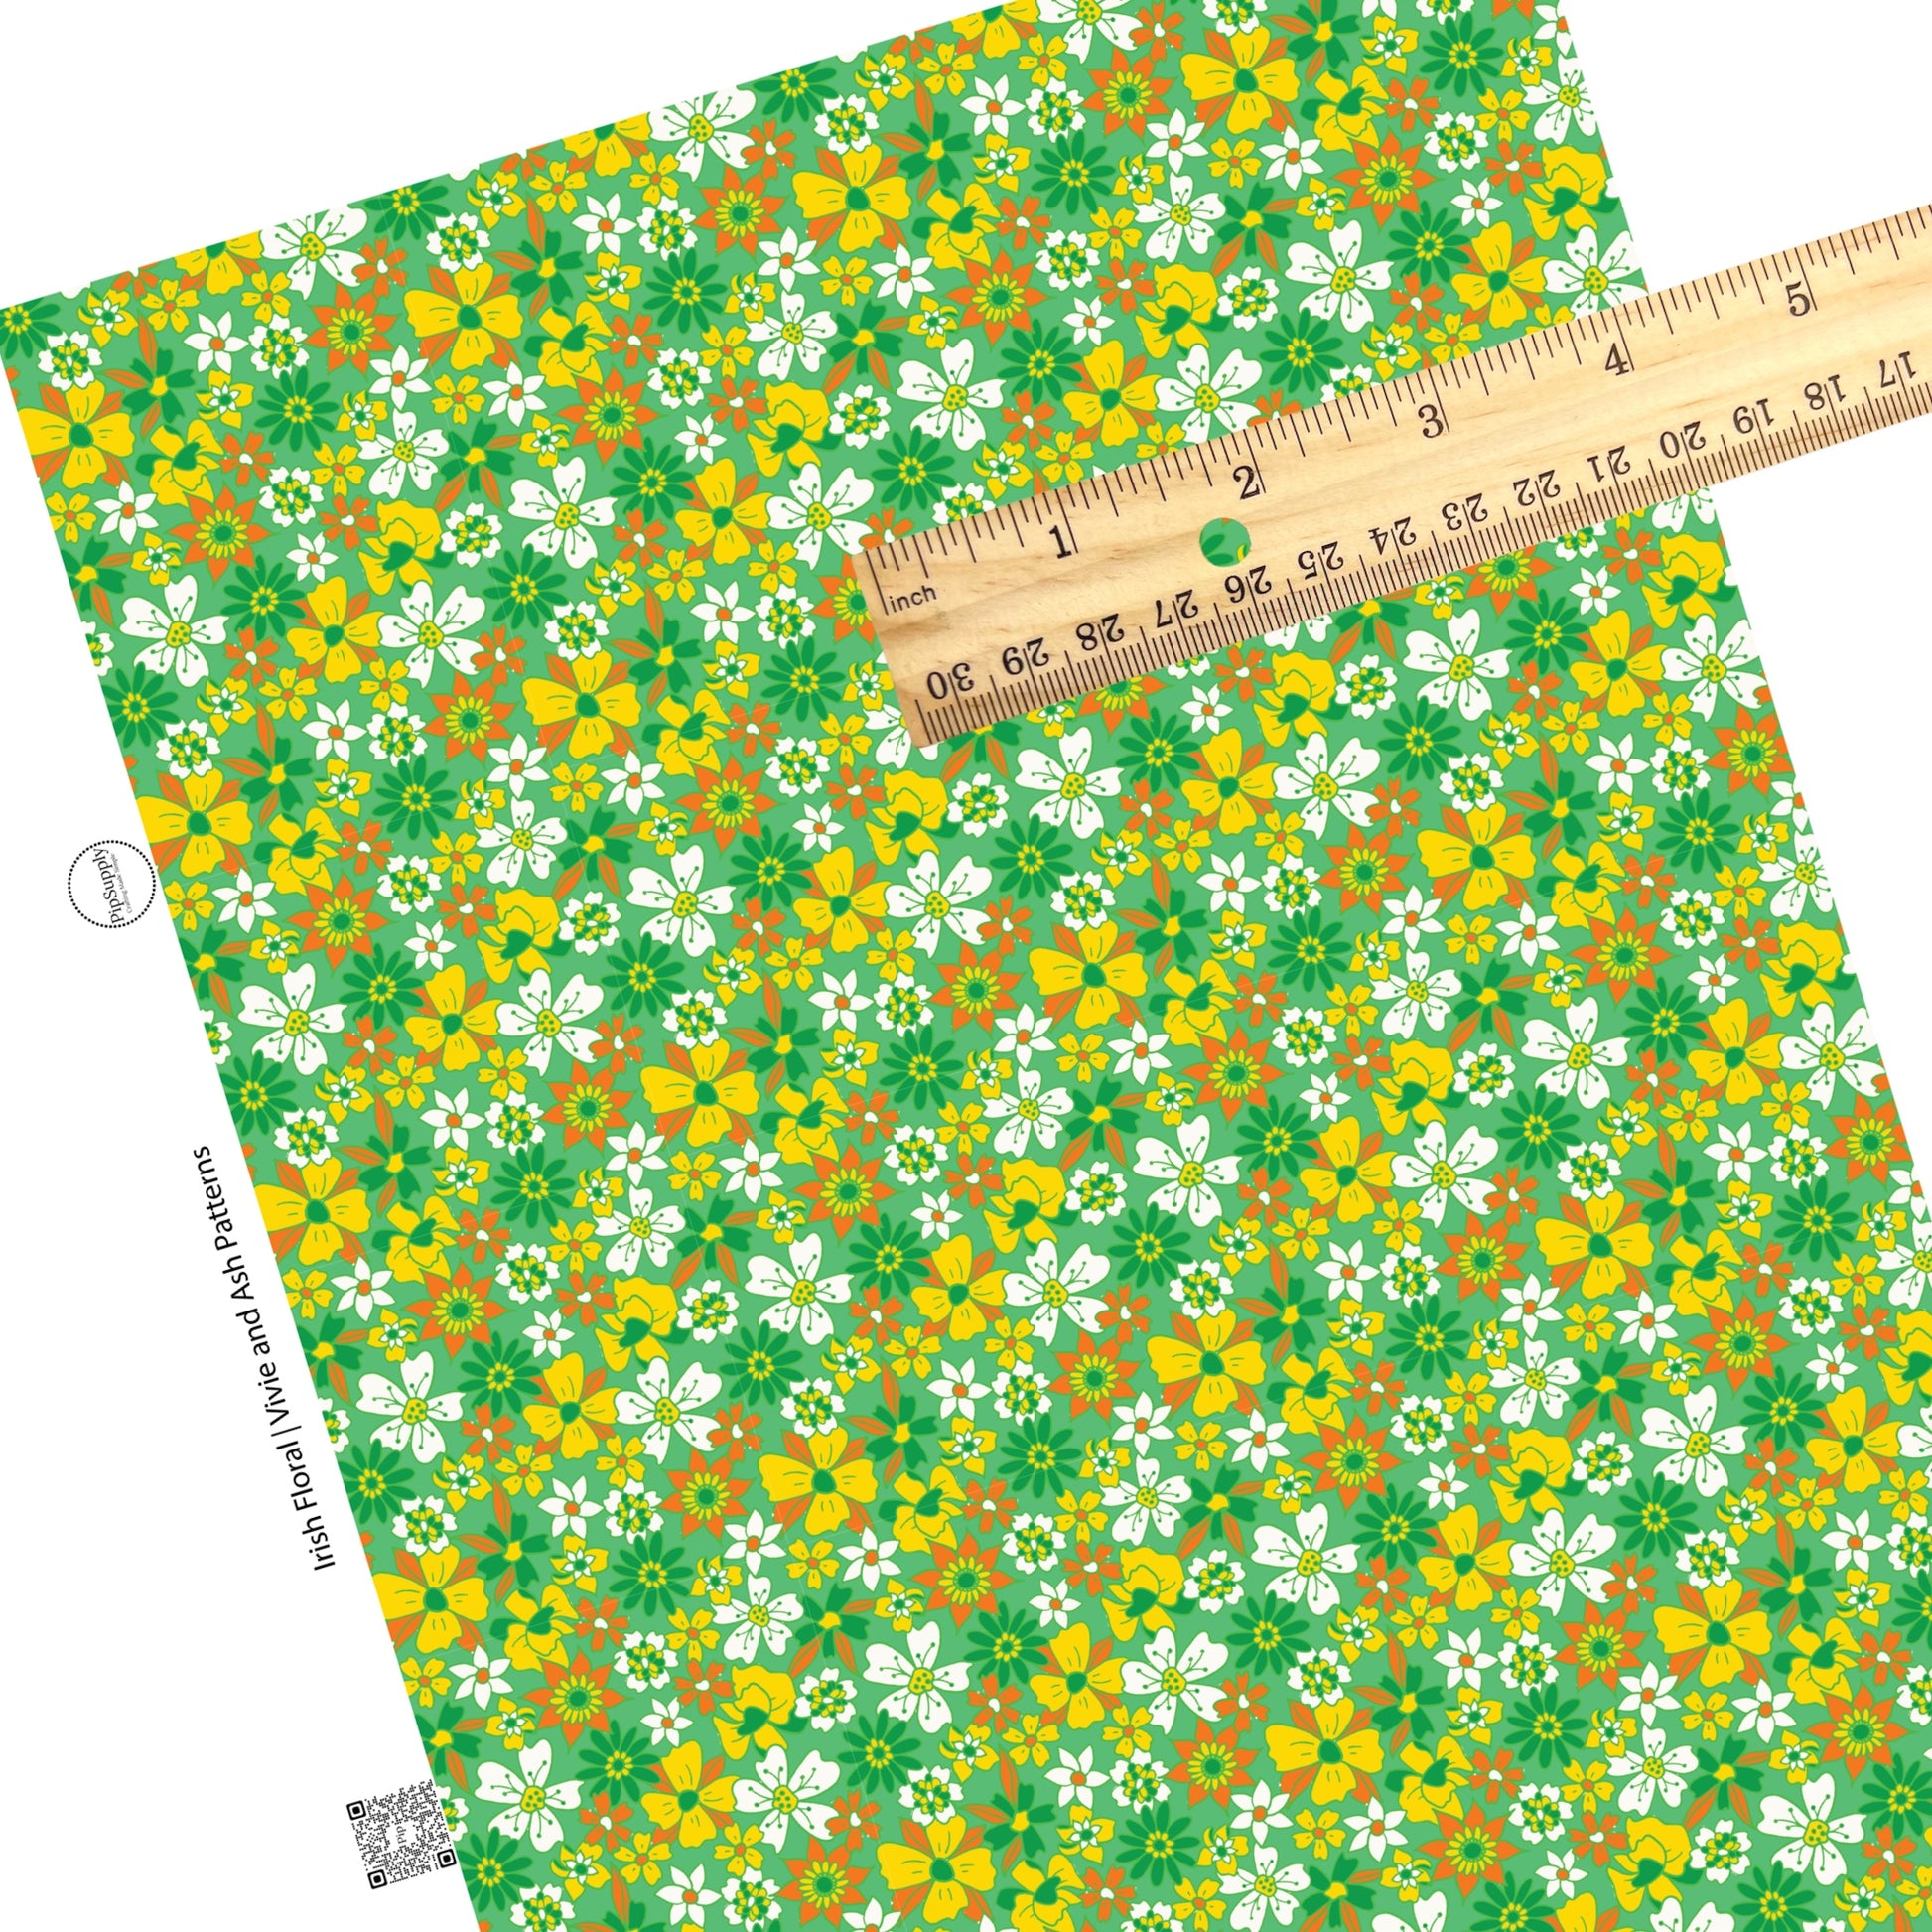 These St. Patrick's Day pattern themed faux leather sheets contain the following design elements: yellow, orange, white, and dark green flowers on green. Our CPSIA compliant faux leather sheets or rolls can be used for all types of crafting projects.